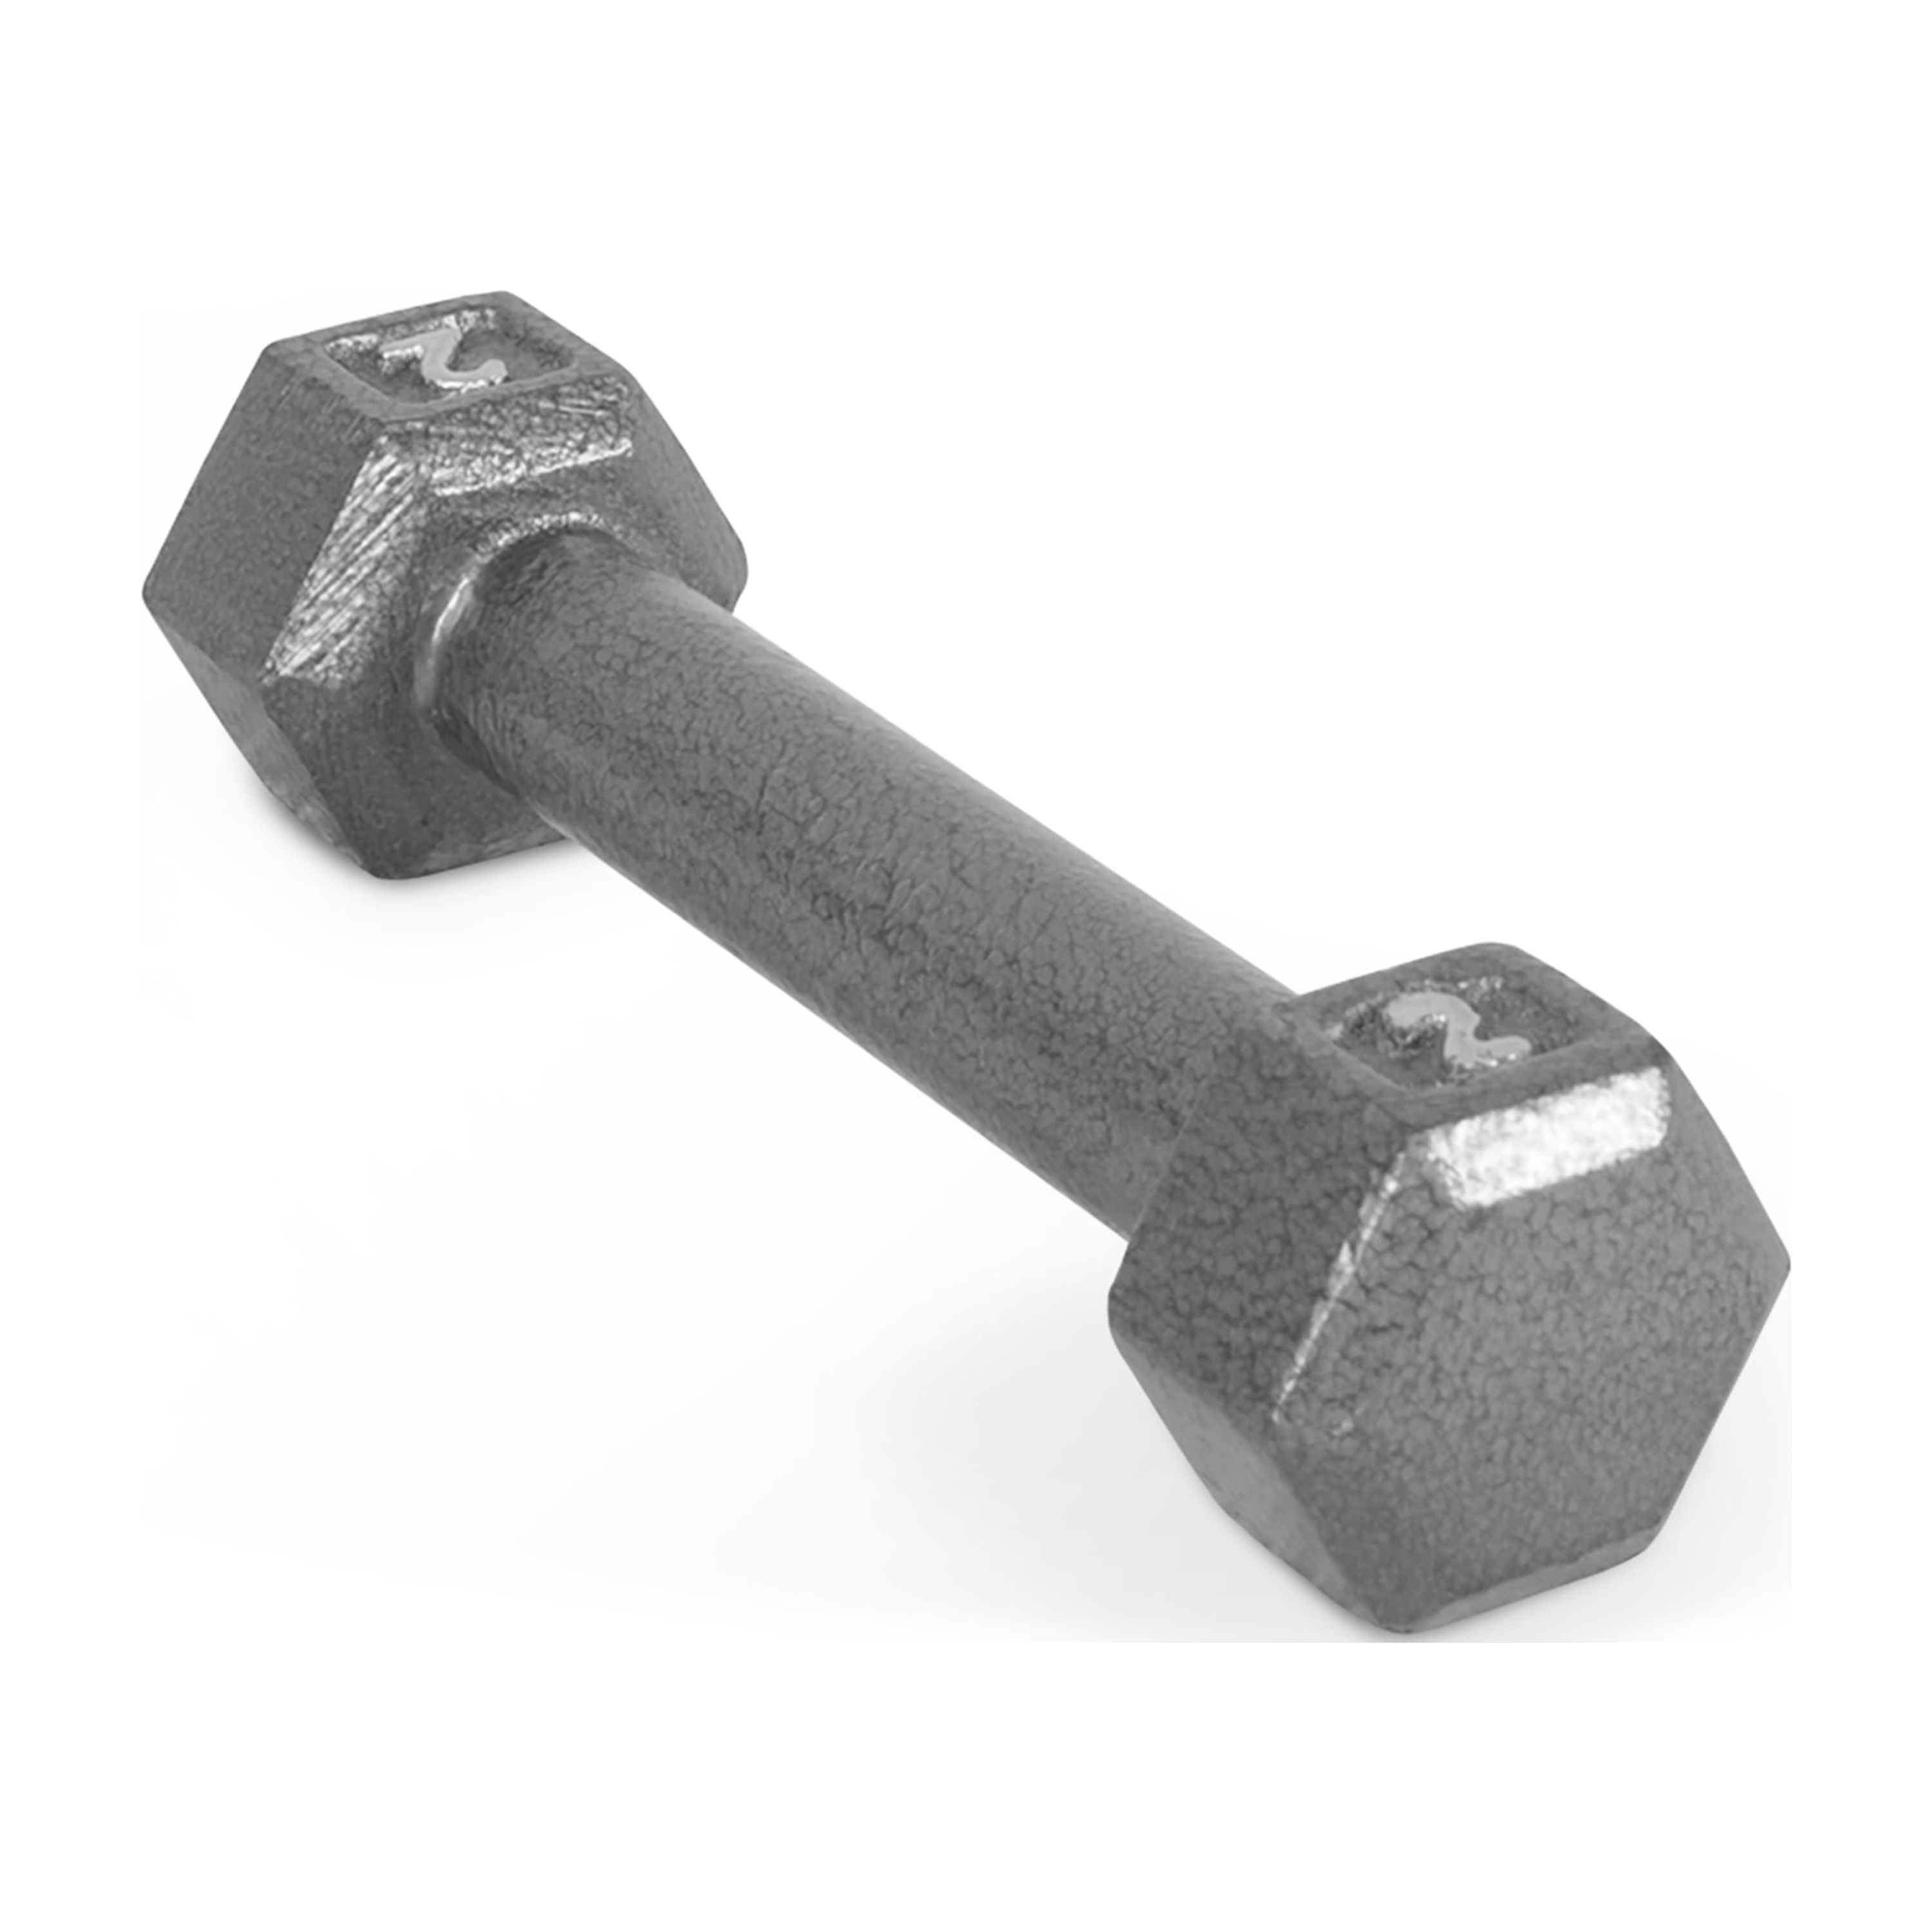 CAP Barbell 2lb Cast Iron Hex Dumbbell, Single - image 1 of 6